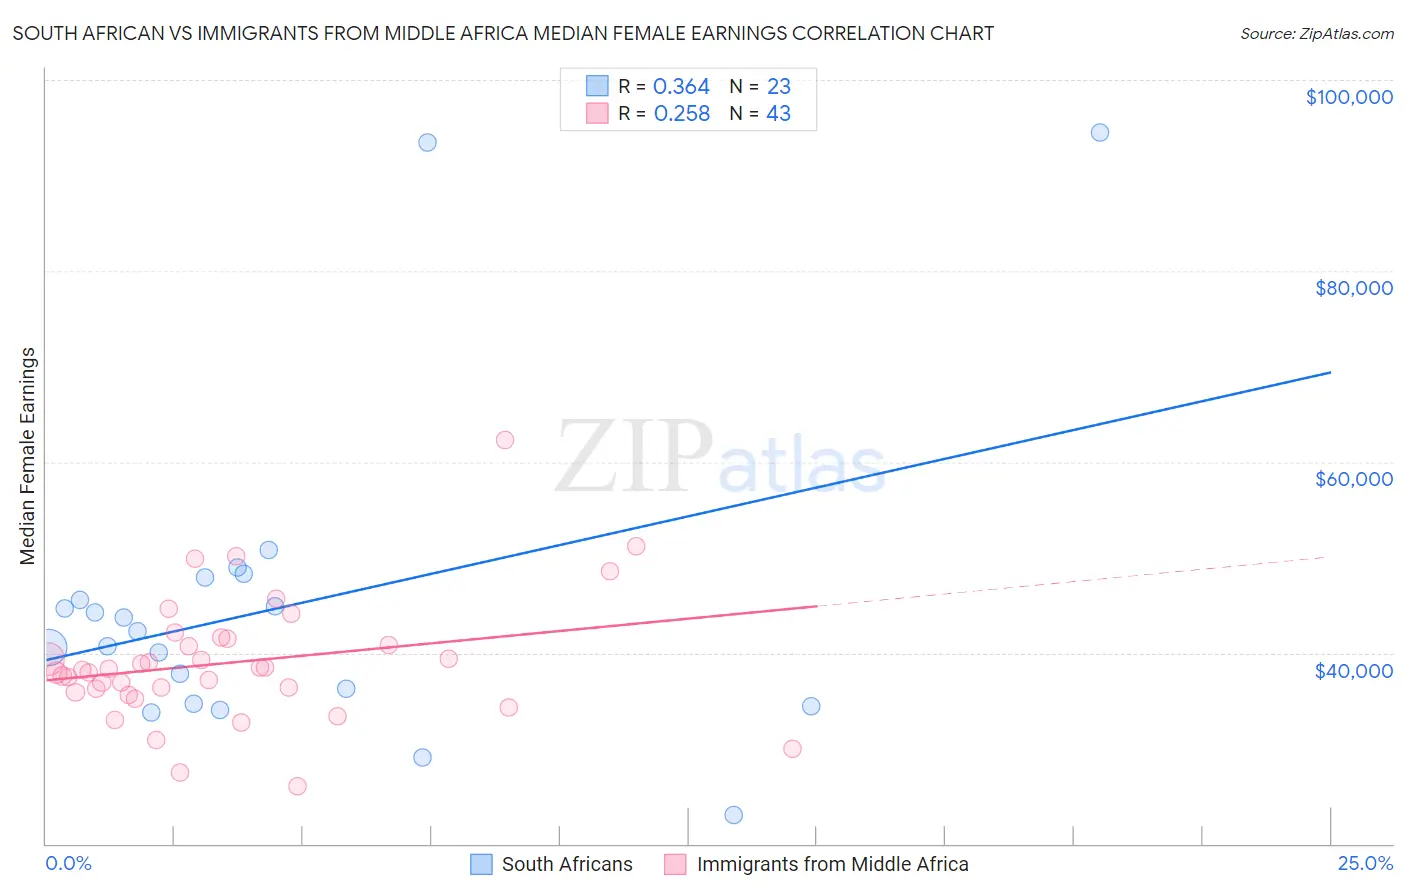 South African vs Immigrants from Middle Africa Median Female Earnings